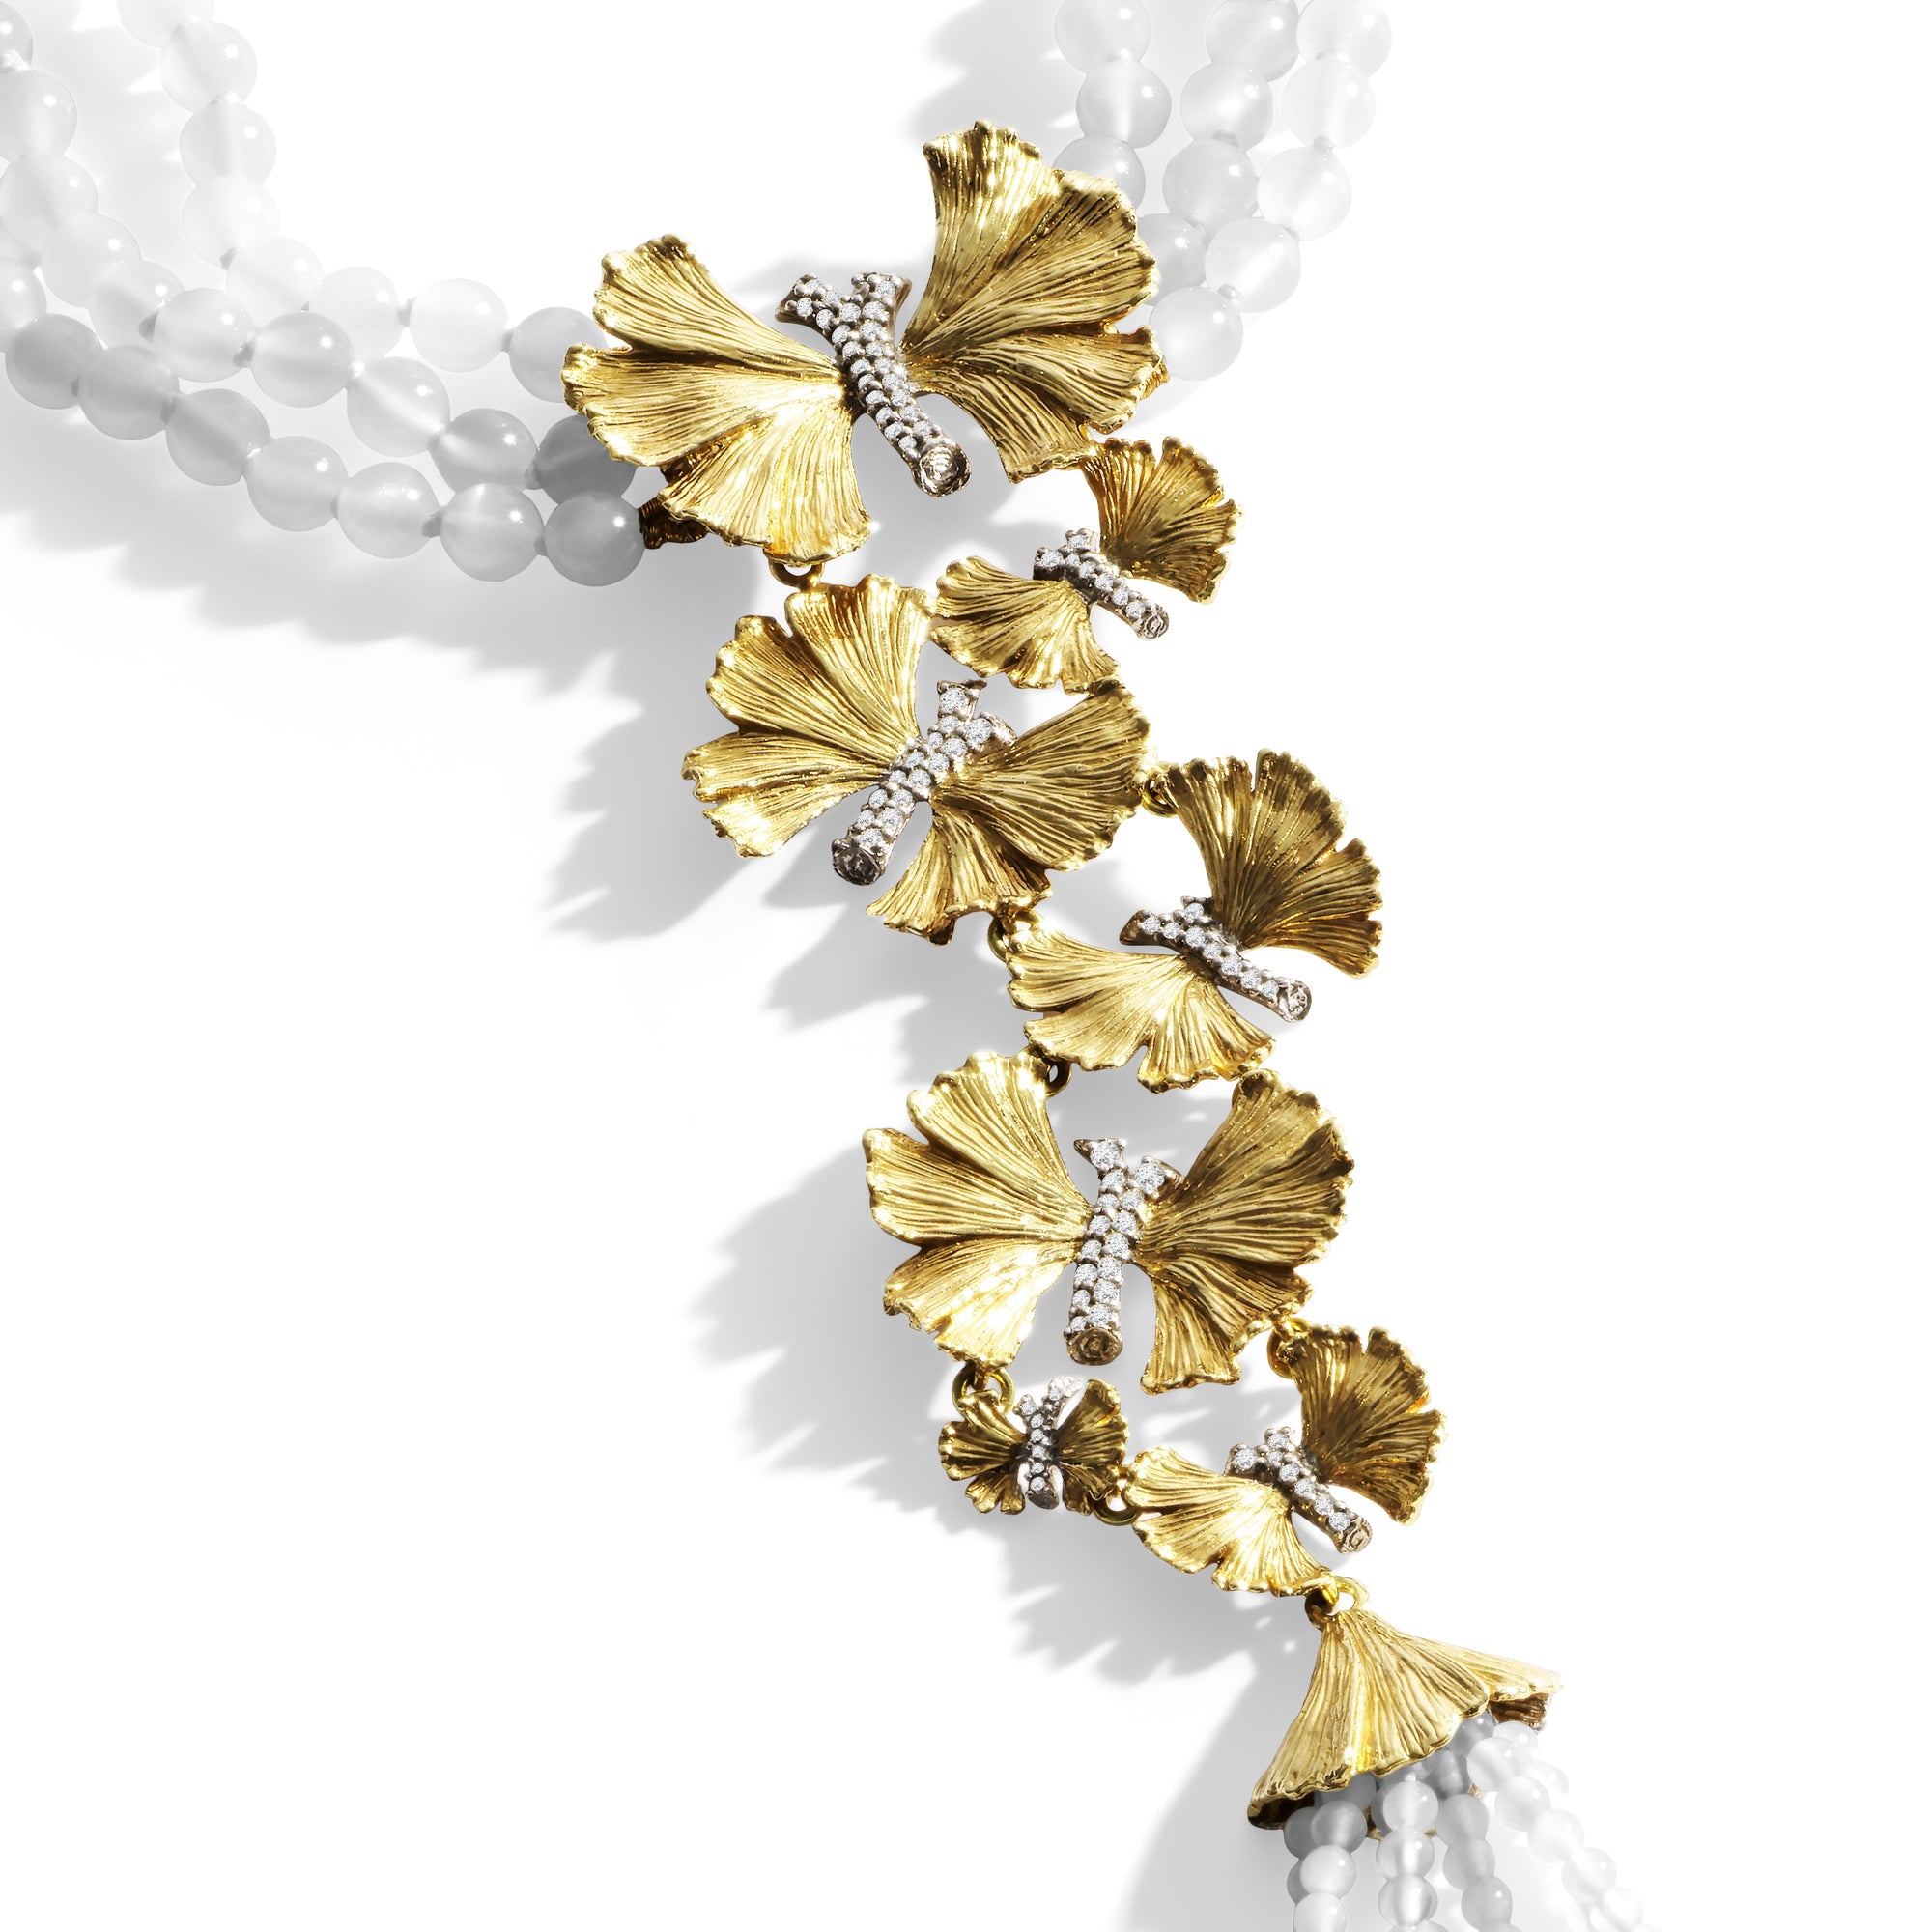 Michael Aram Butterfly Ginkgo Tassel Necklace with Moonstone and Diamonds